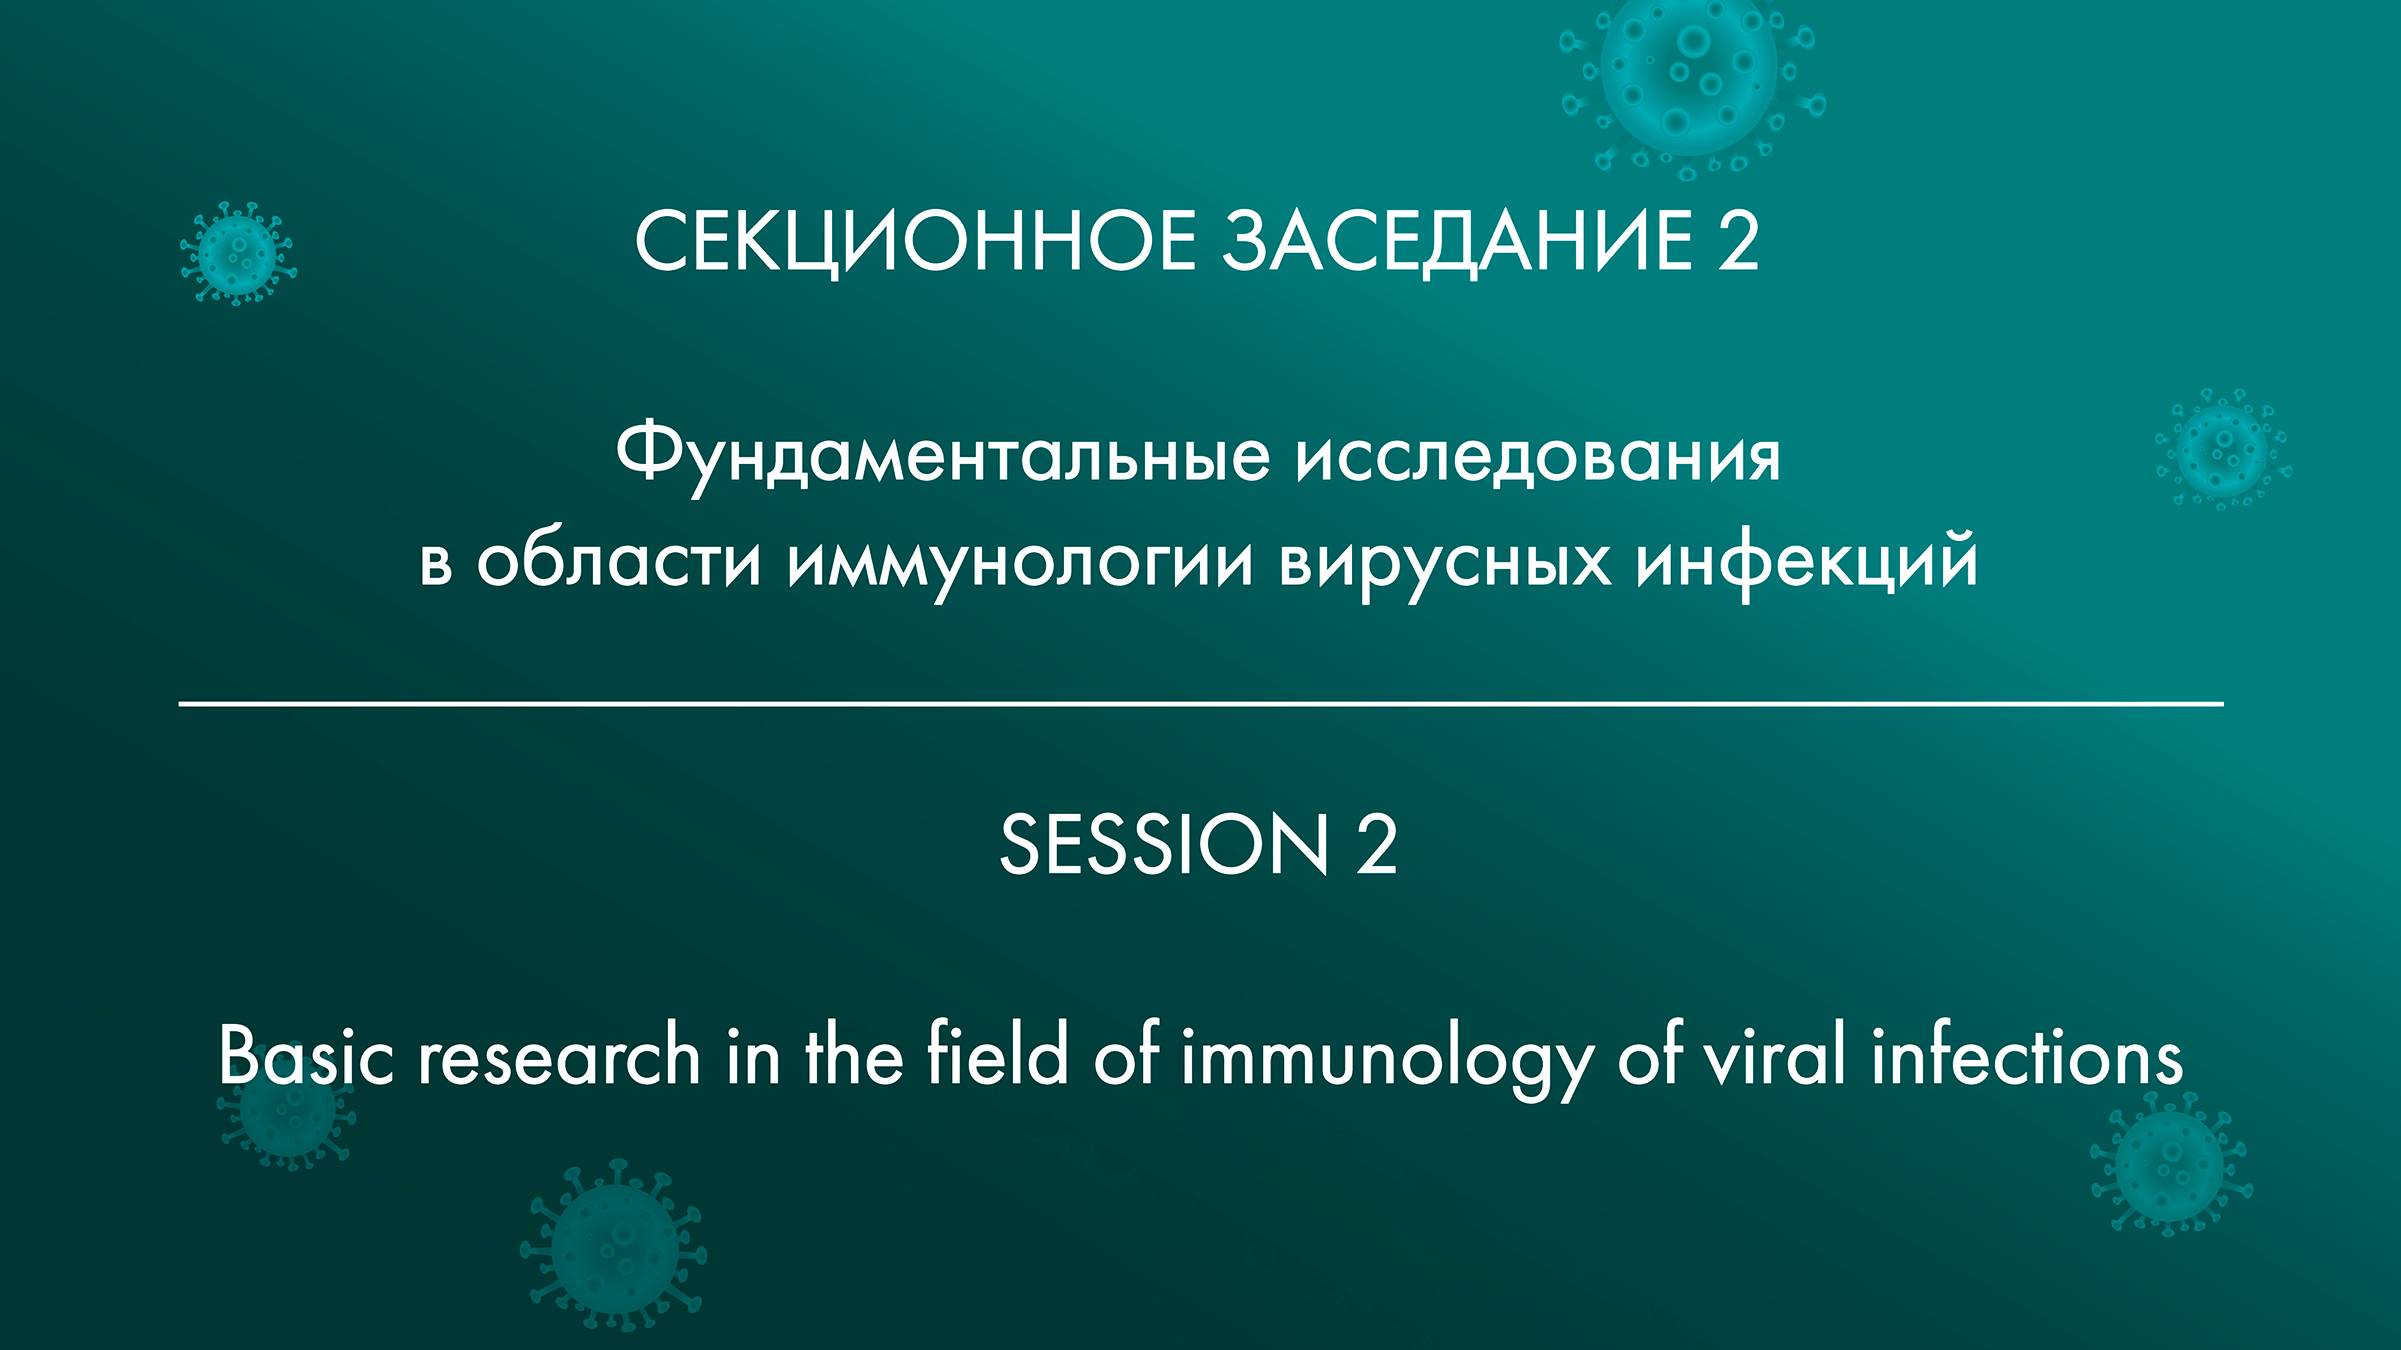 SESSION 2 Basic research in the field of immunology of viral infections